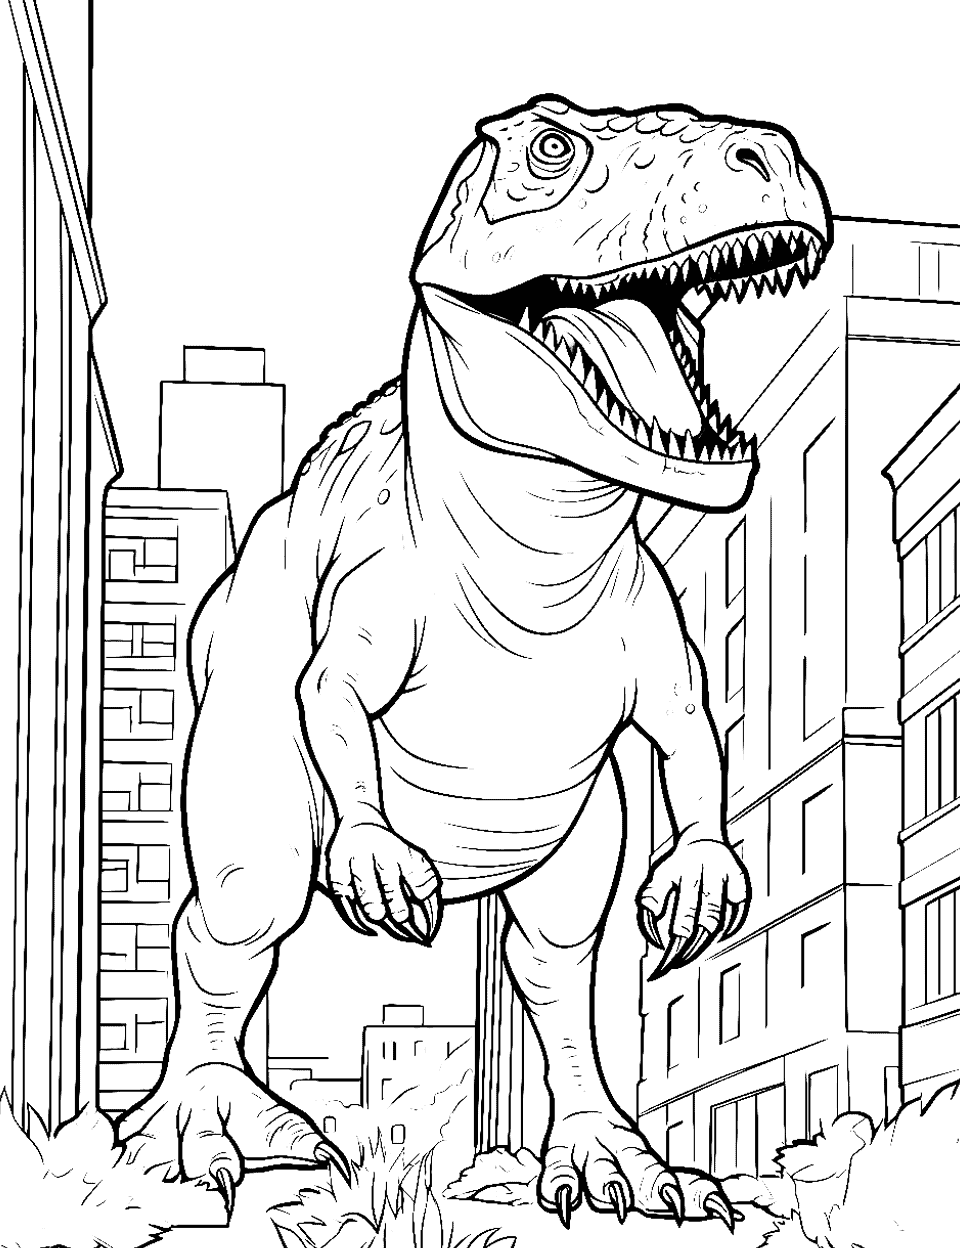 T Rex in Town T-rex Coloring Page - A T-Rex cautiously navigating between city buildings.